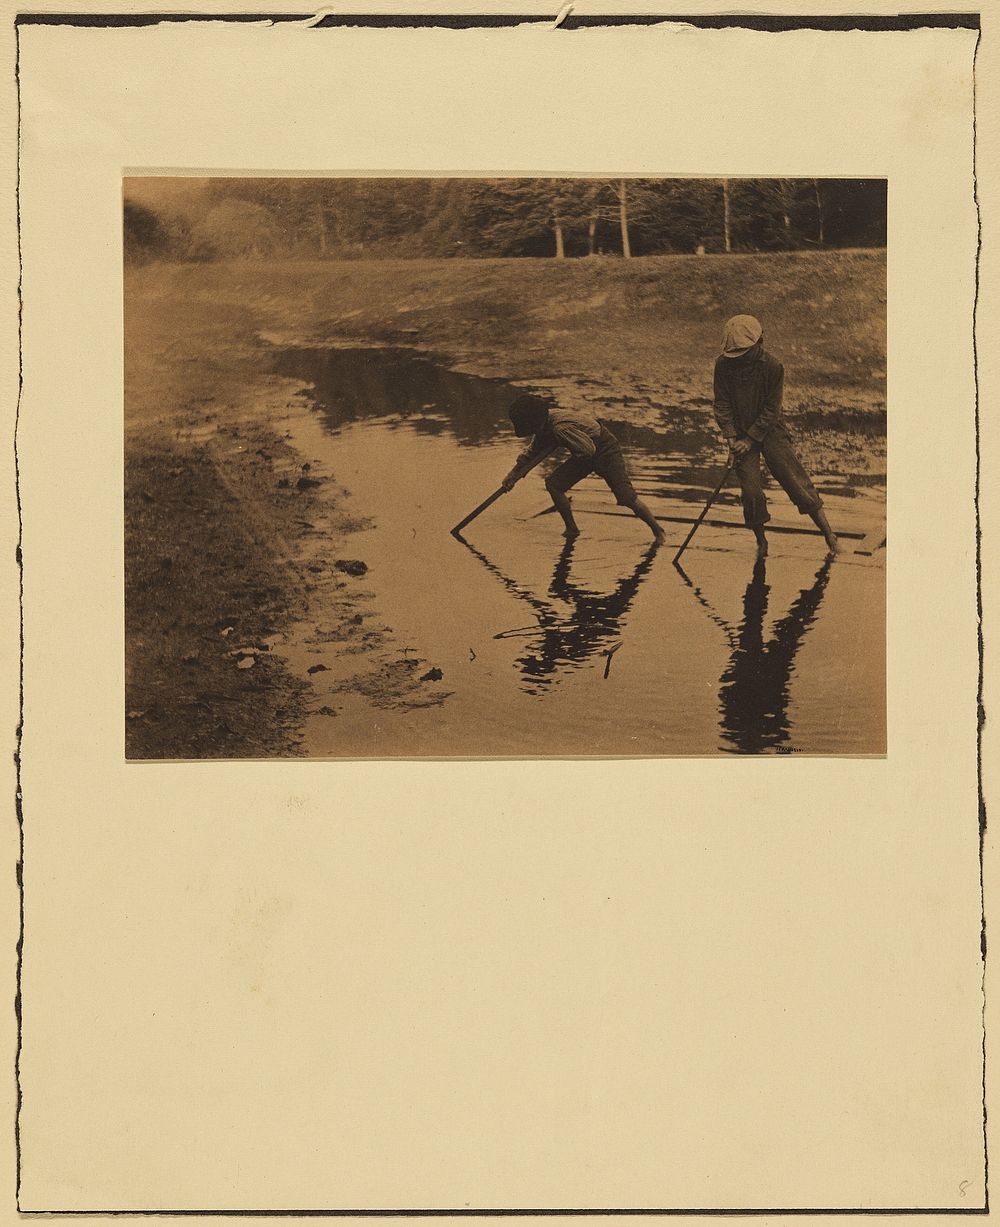 Two Boys Playing in a Stream by Gertrude Käsebier